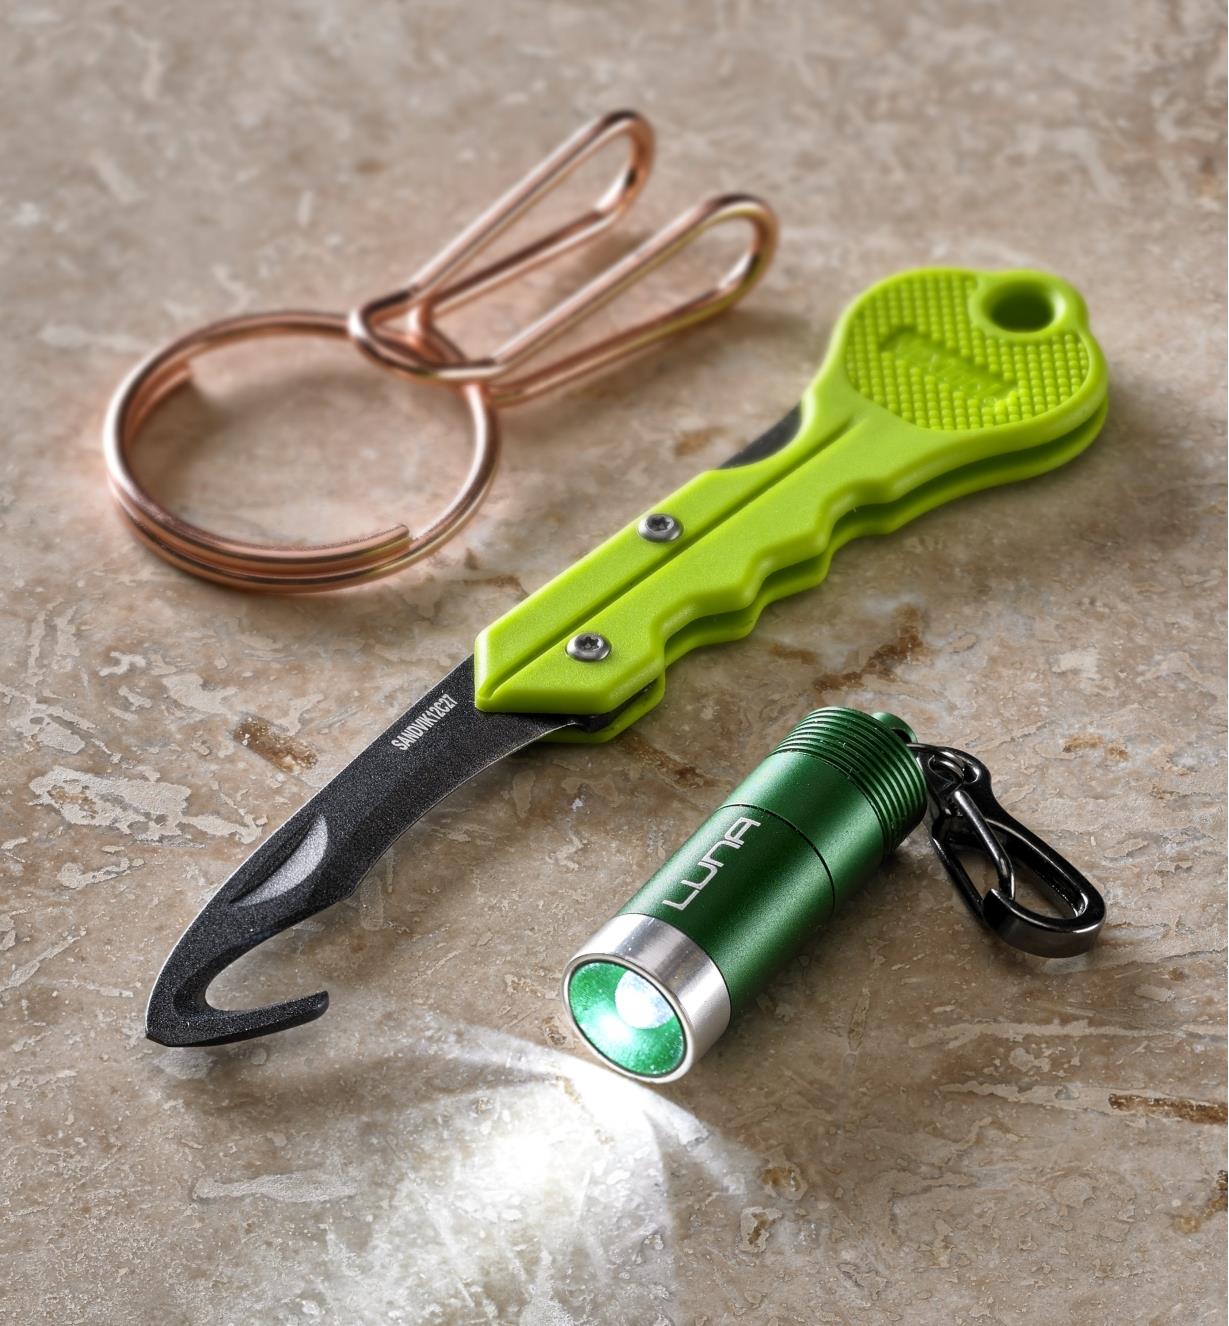 A mini LED clip light, a SqueezeRing key clip and a keychain safety cutter shown together